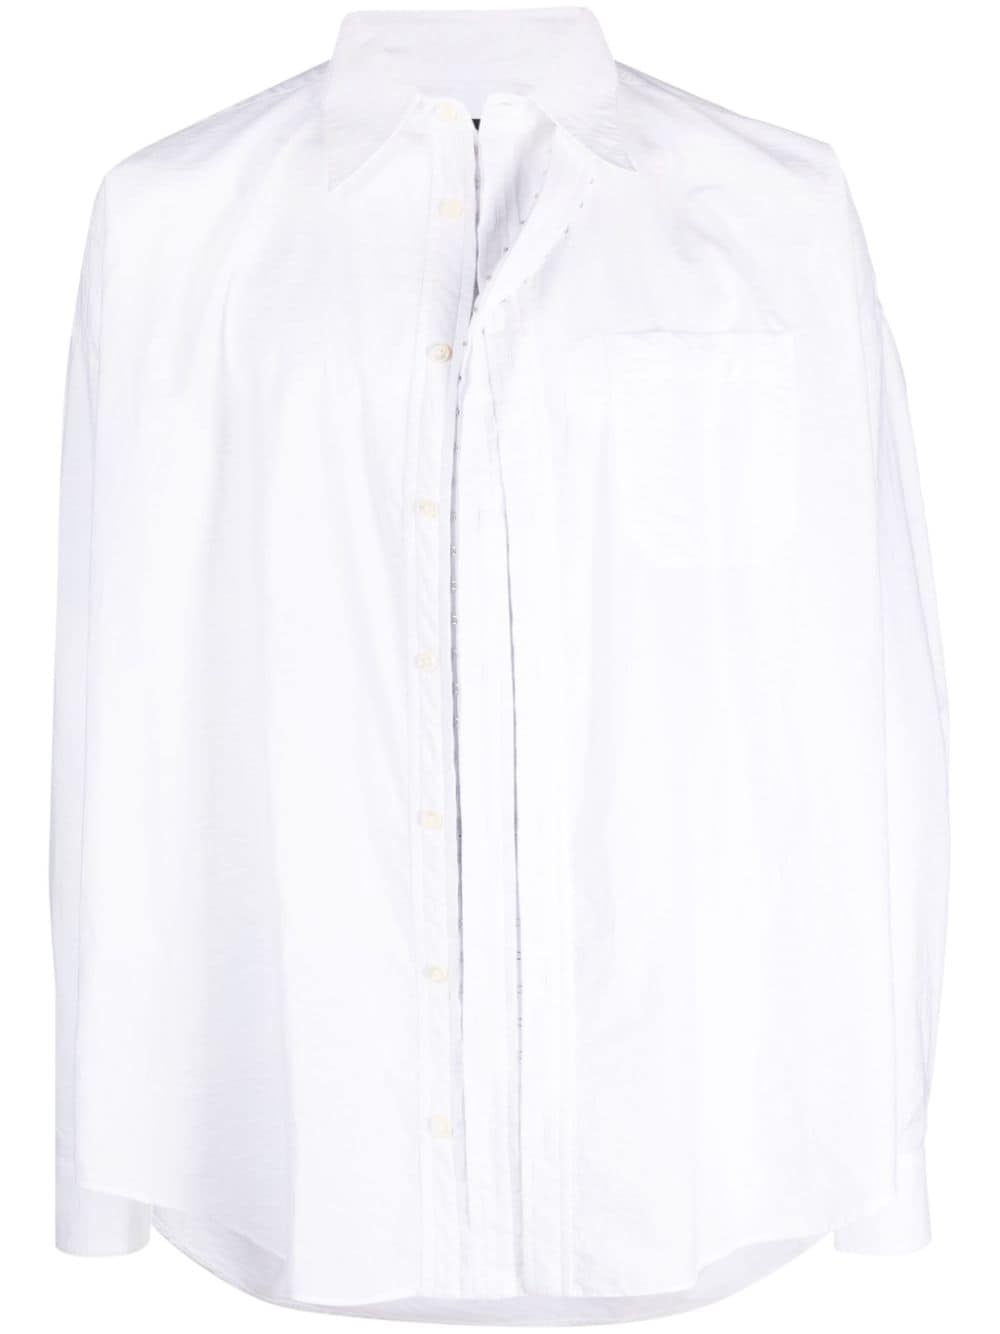 Y/Project deconstructed poplin shirt - White von Y/Project